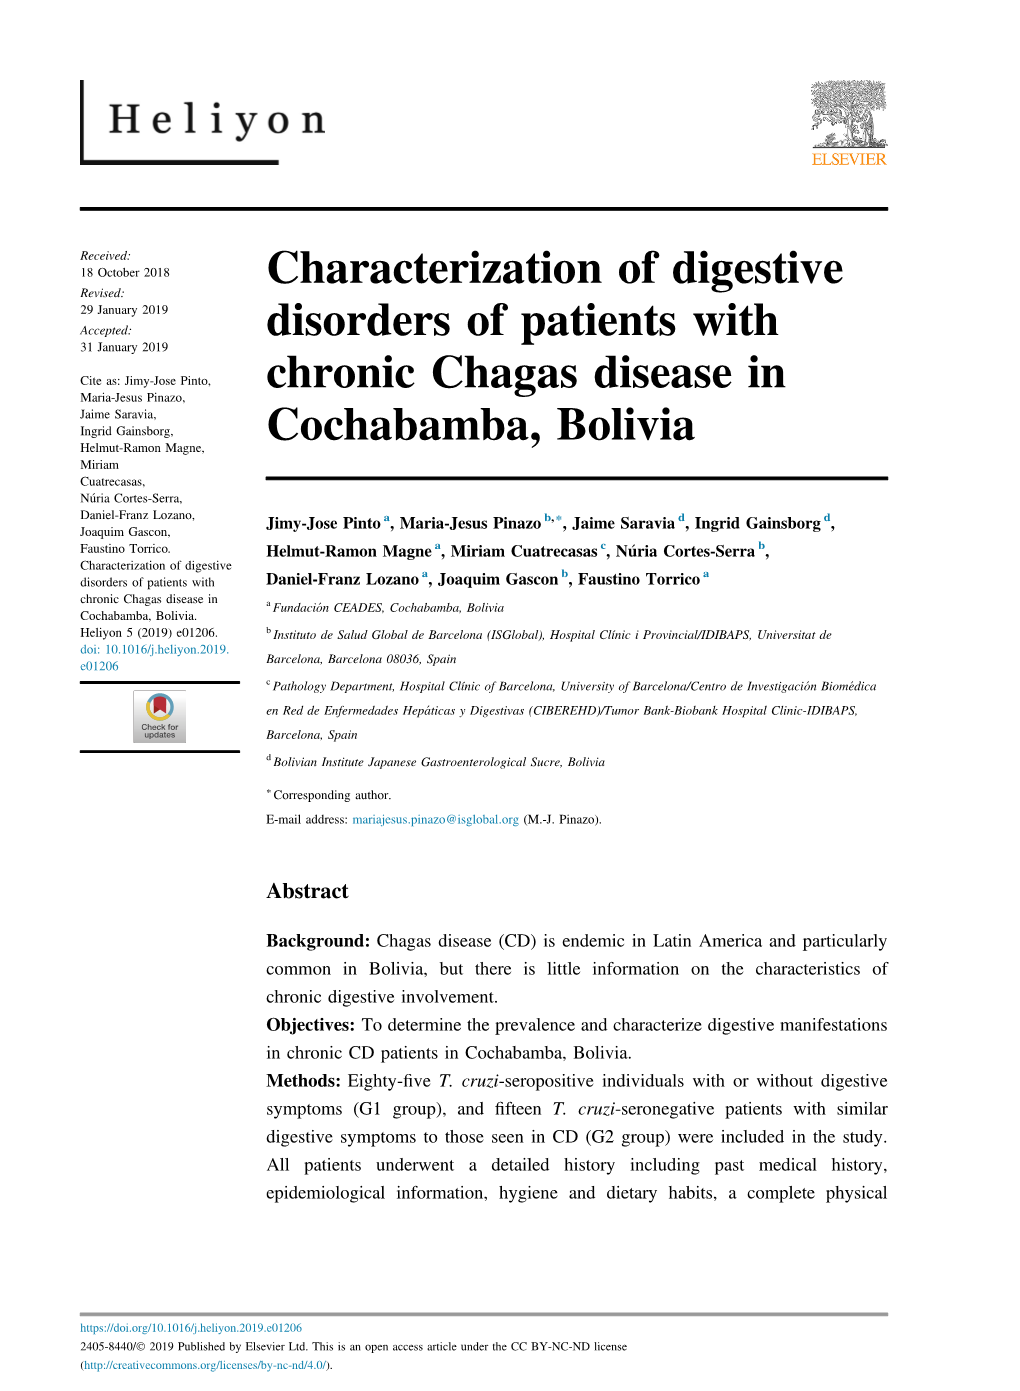 Characterization of Digestive Disorders of Patients with Chronic Chagas Disease in Cochabamba, Bolivia